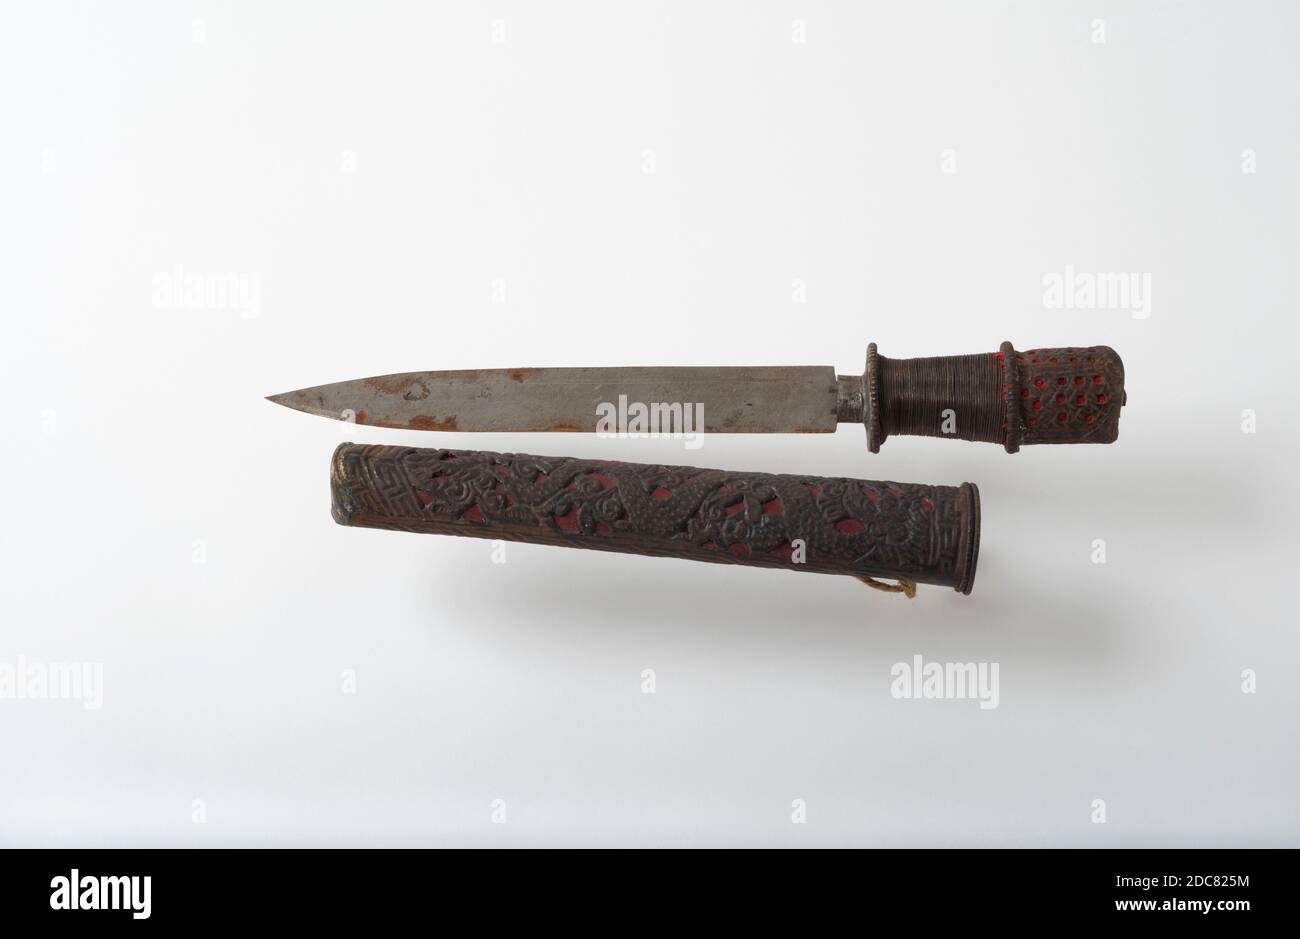 A Bhutanese Kukri knife and sheath, used by farmers and countrymen for daily tasks, defence and hunting. Stock Photo